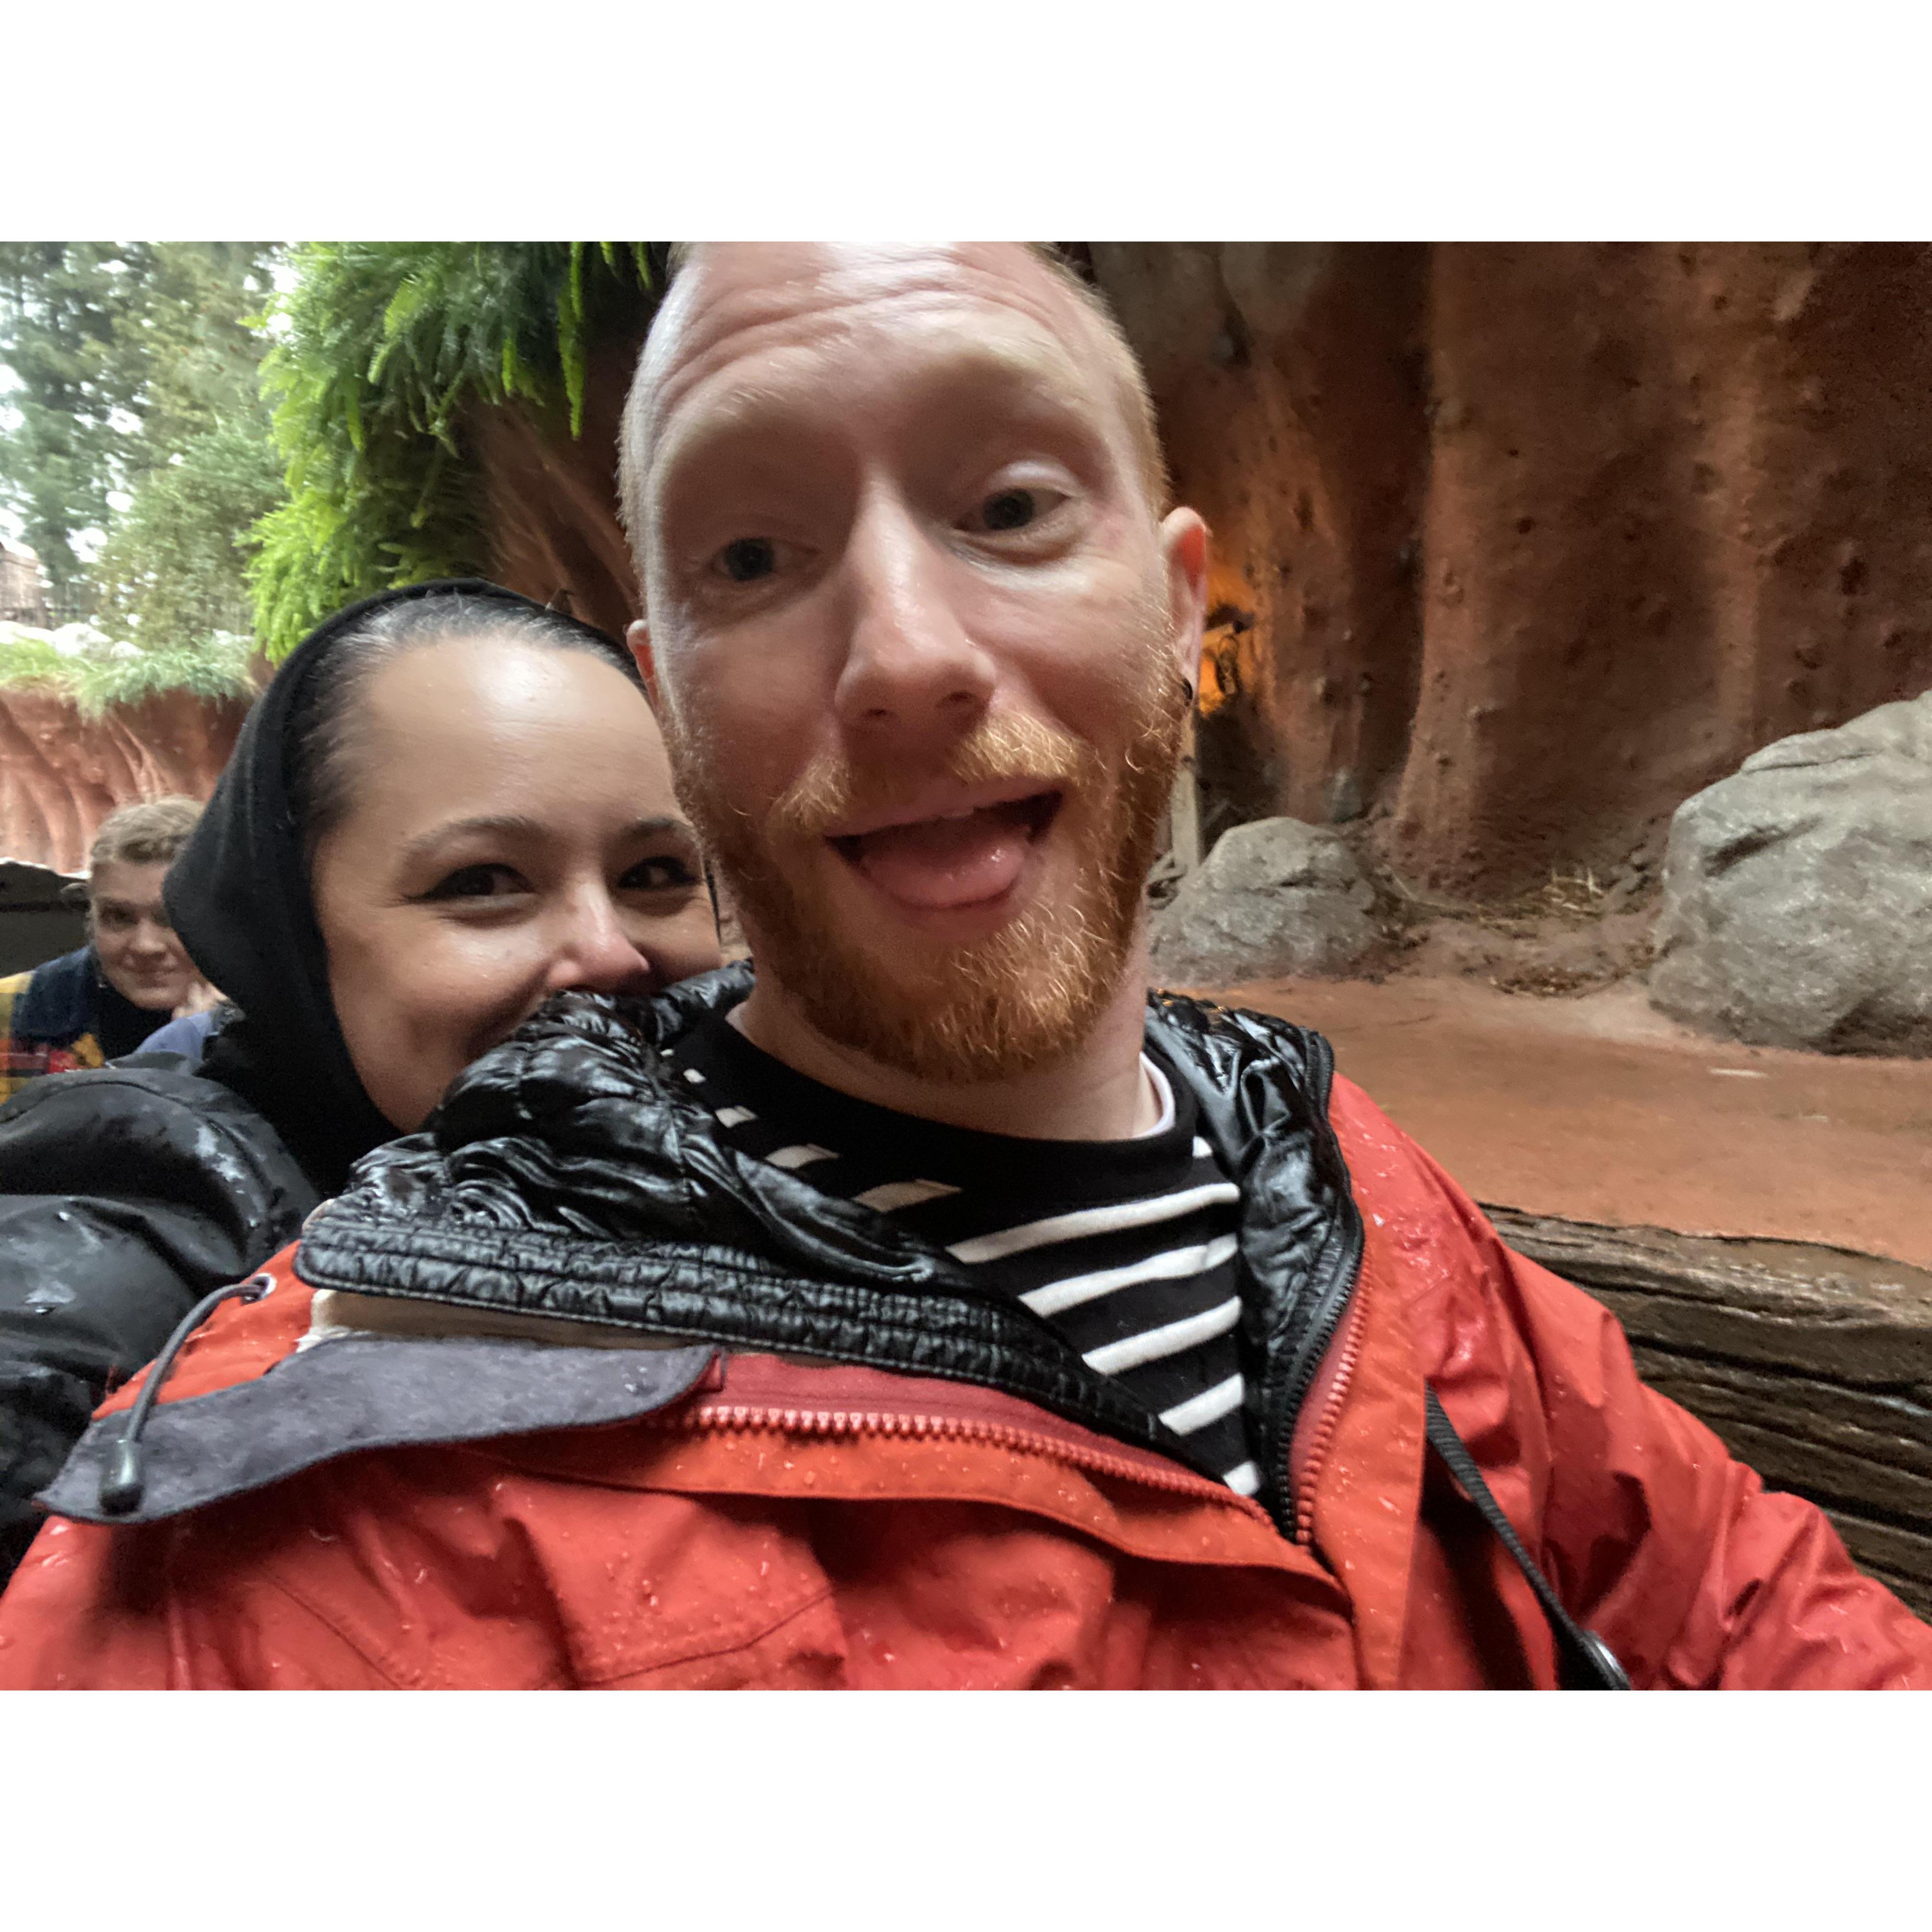 Went on splash mountain at Disneyland over and over :)